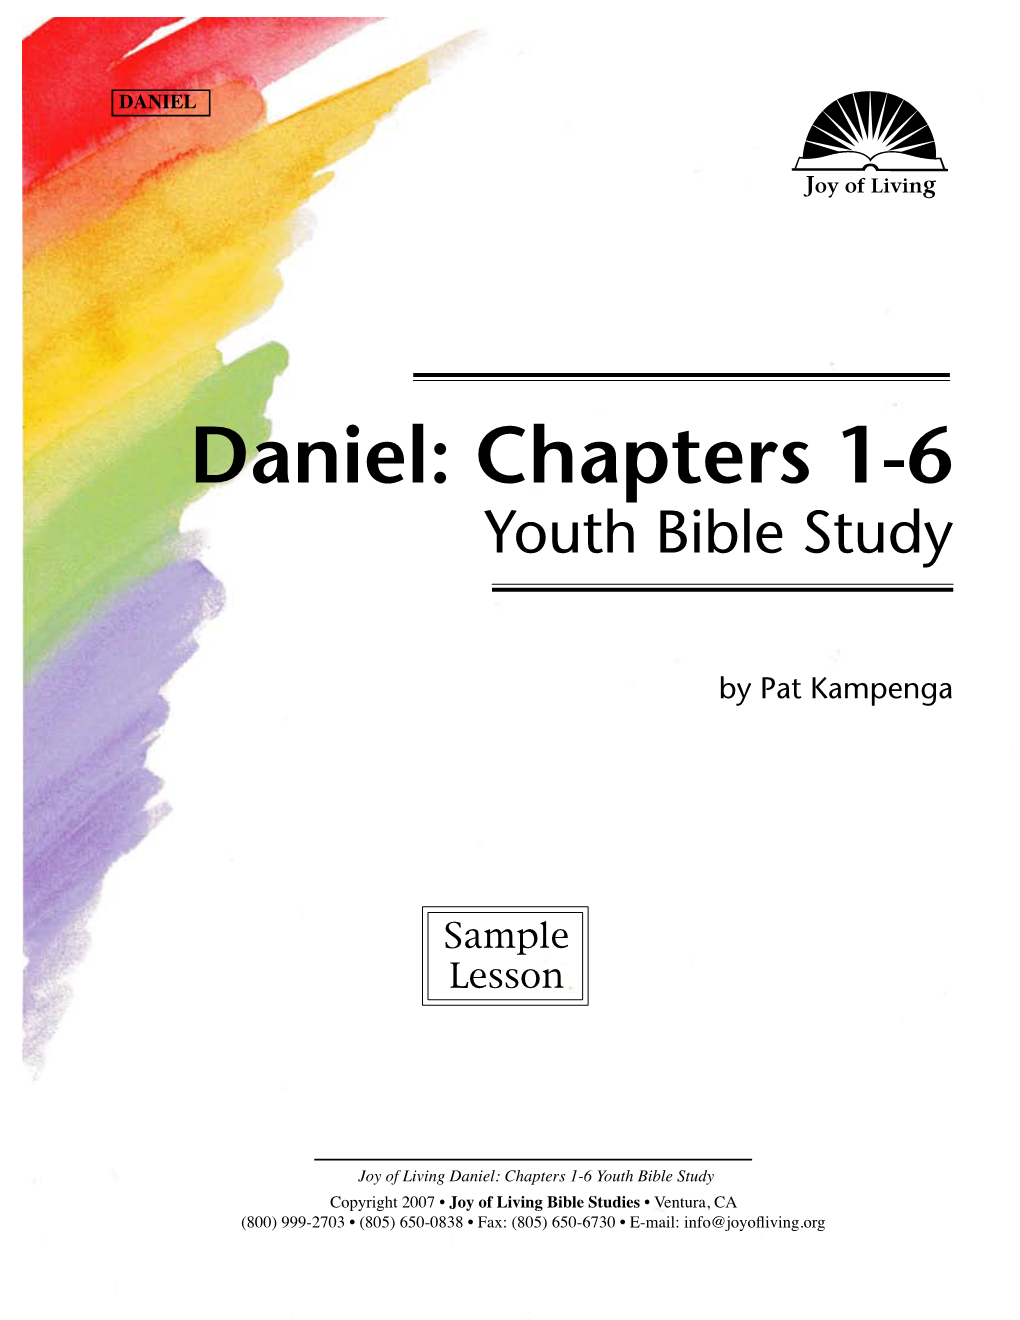 Daniel: Chapters 1-6 Youth Bible Study